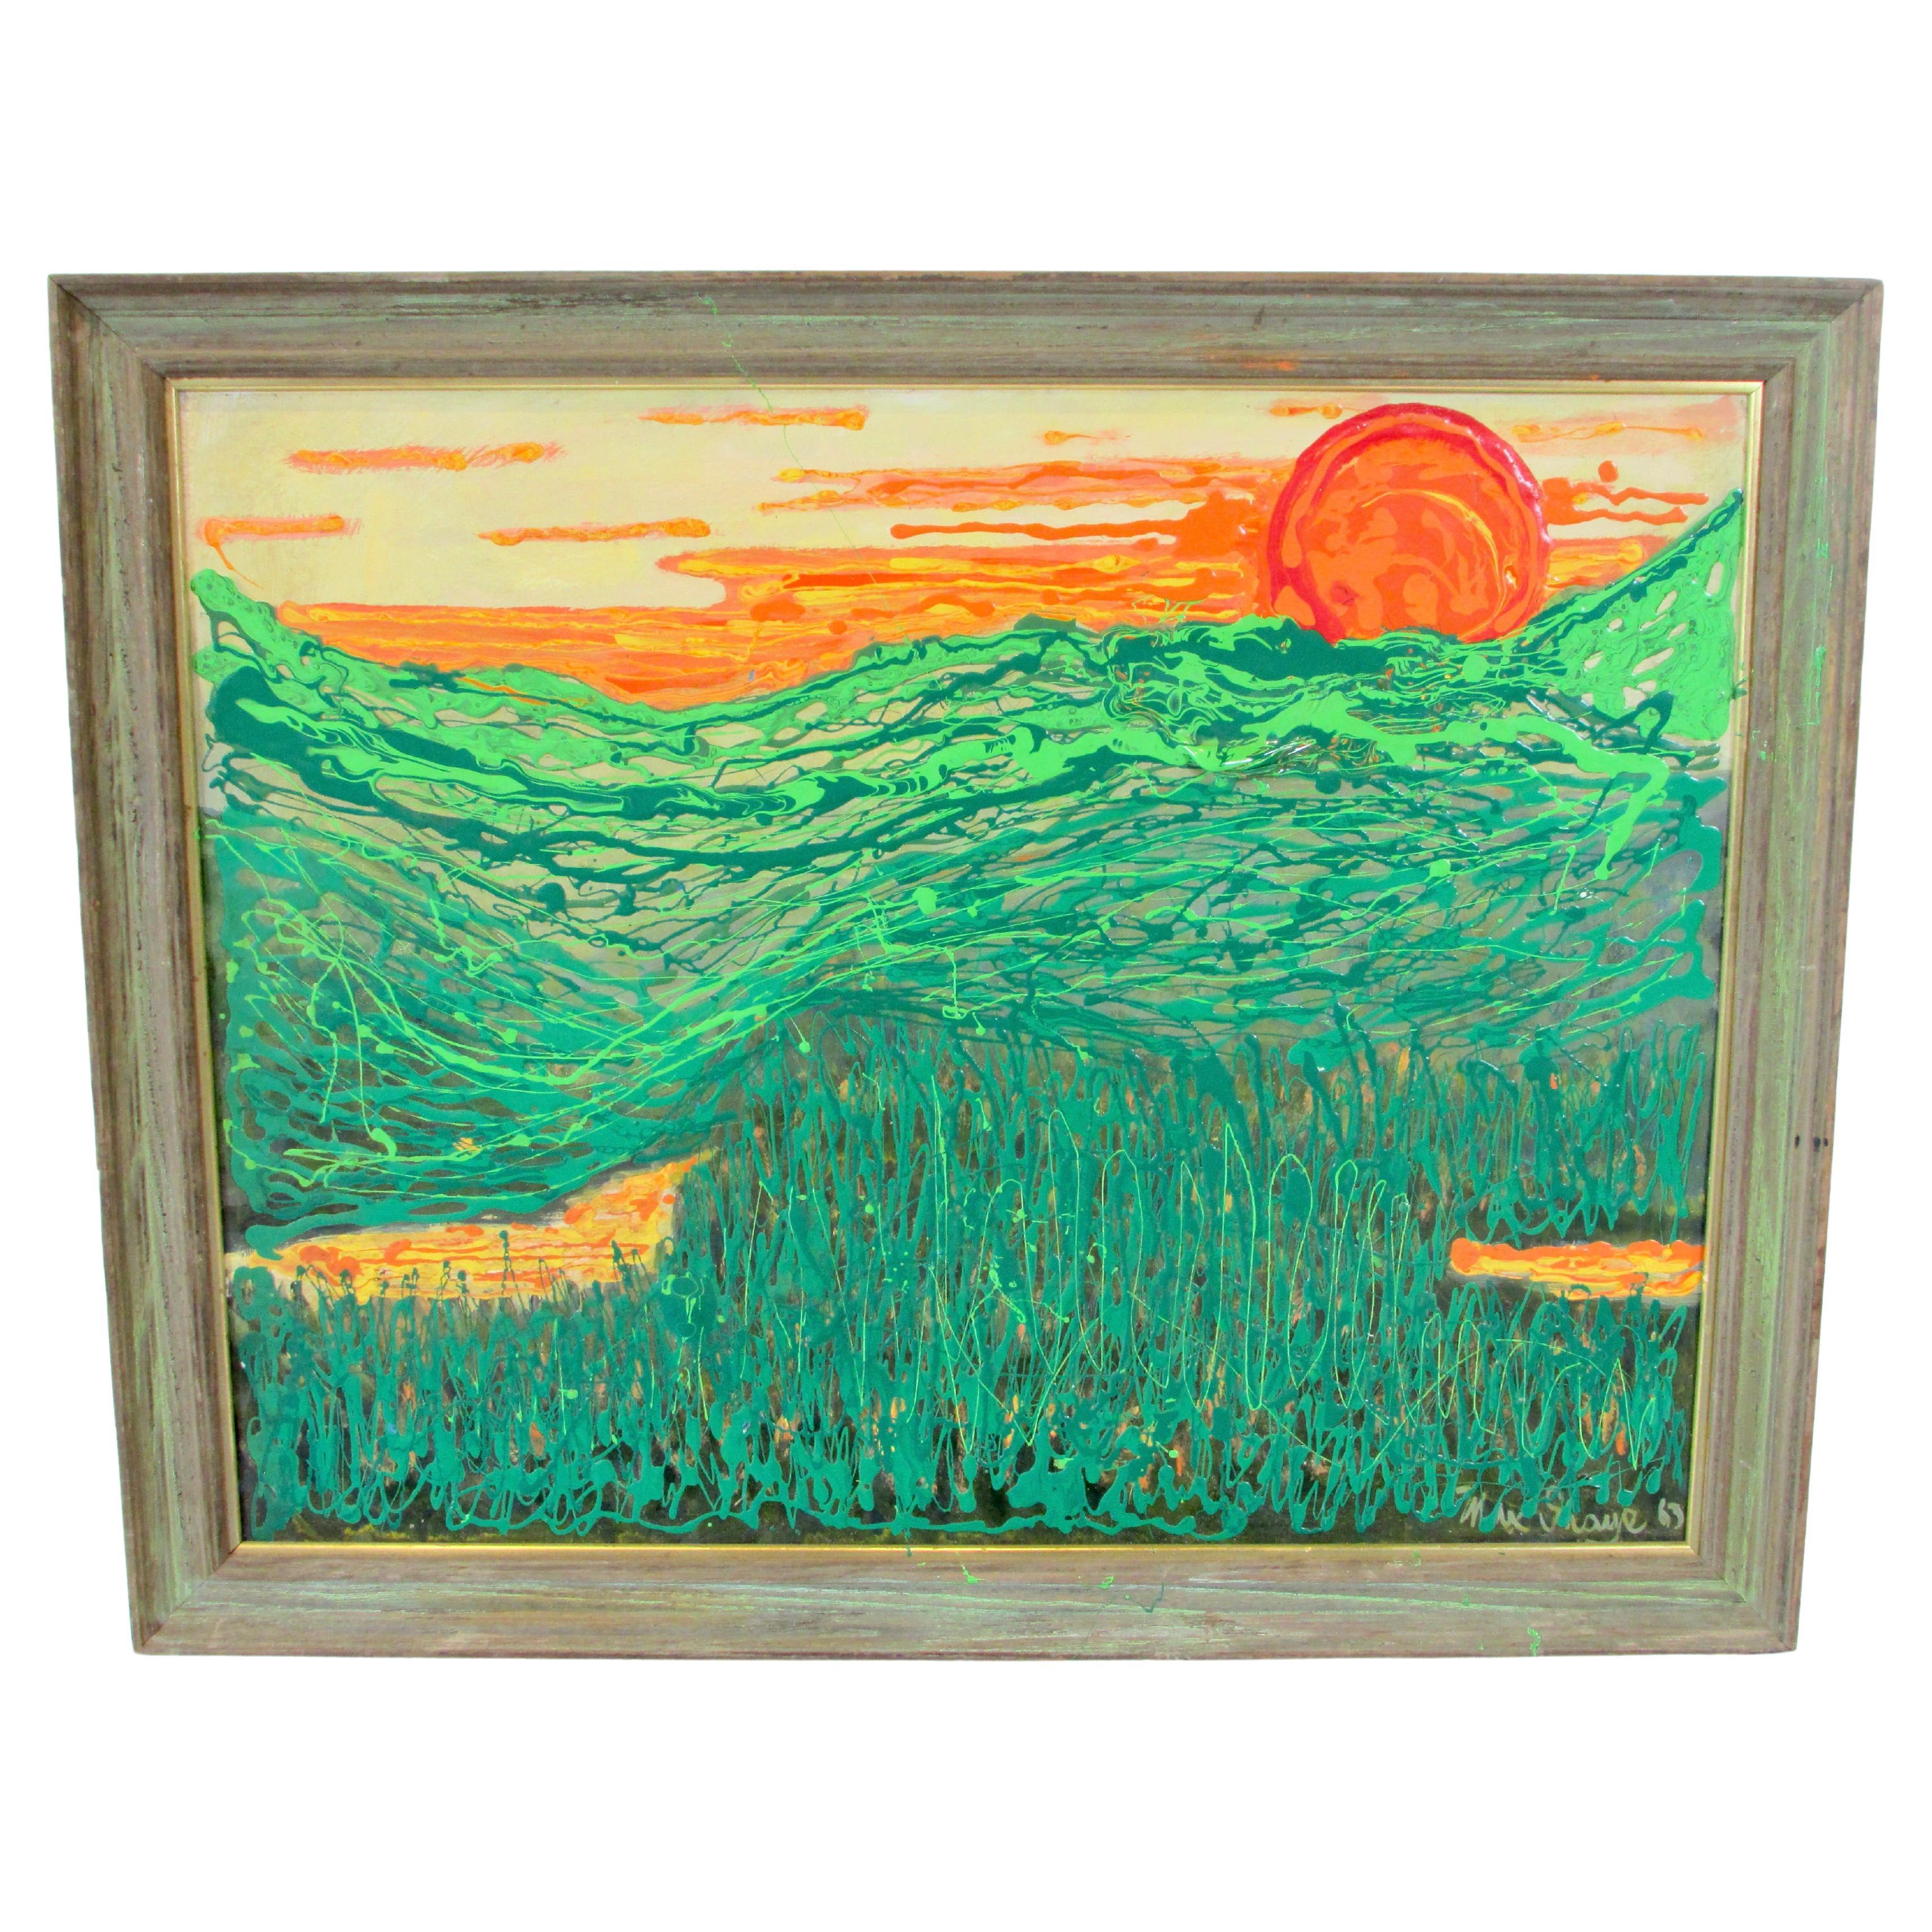 Max Shaye Textured Acrylic on board painting Orange Sun Over Green Valley For Sale